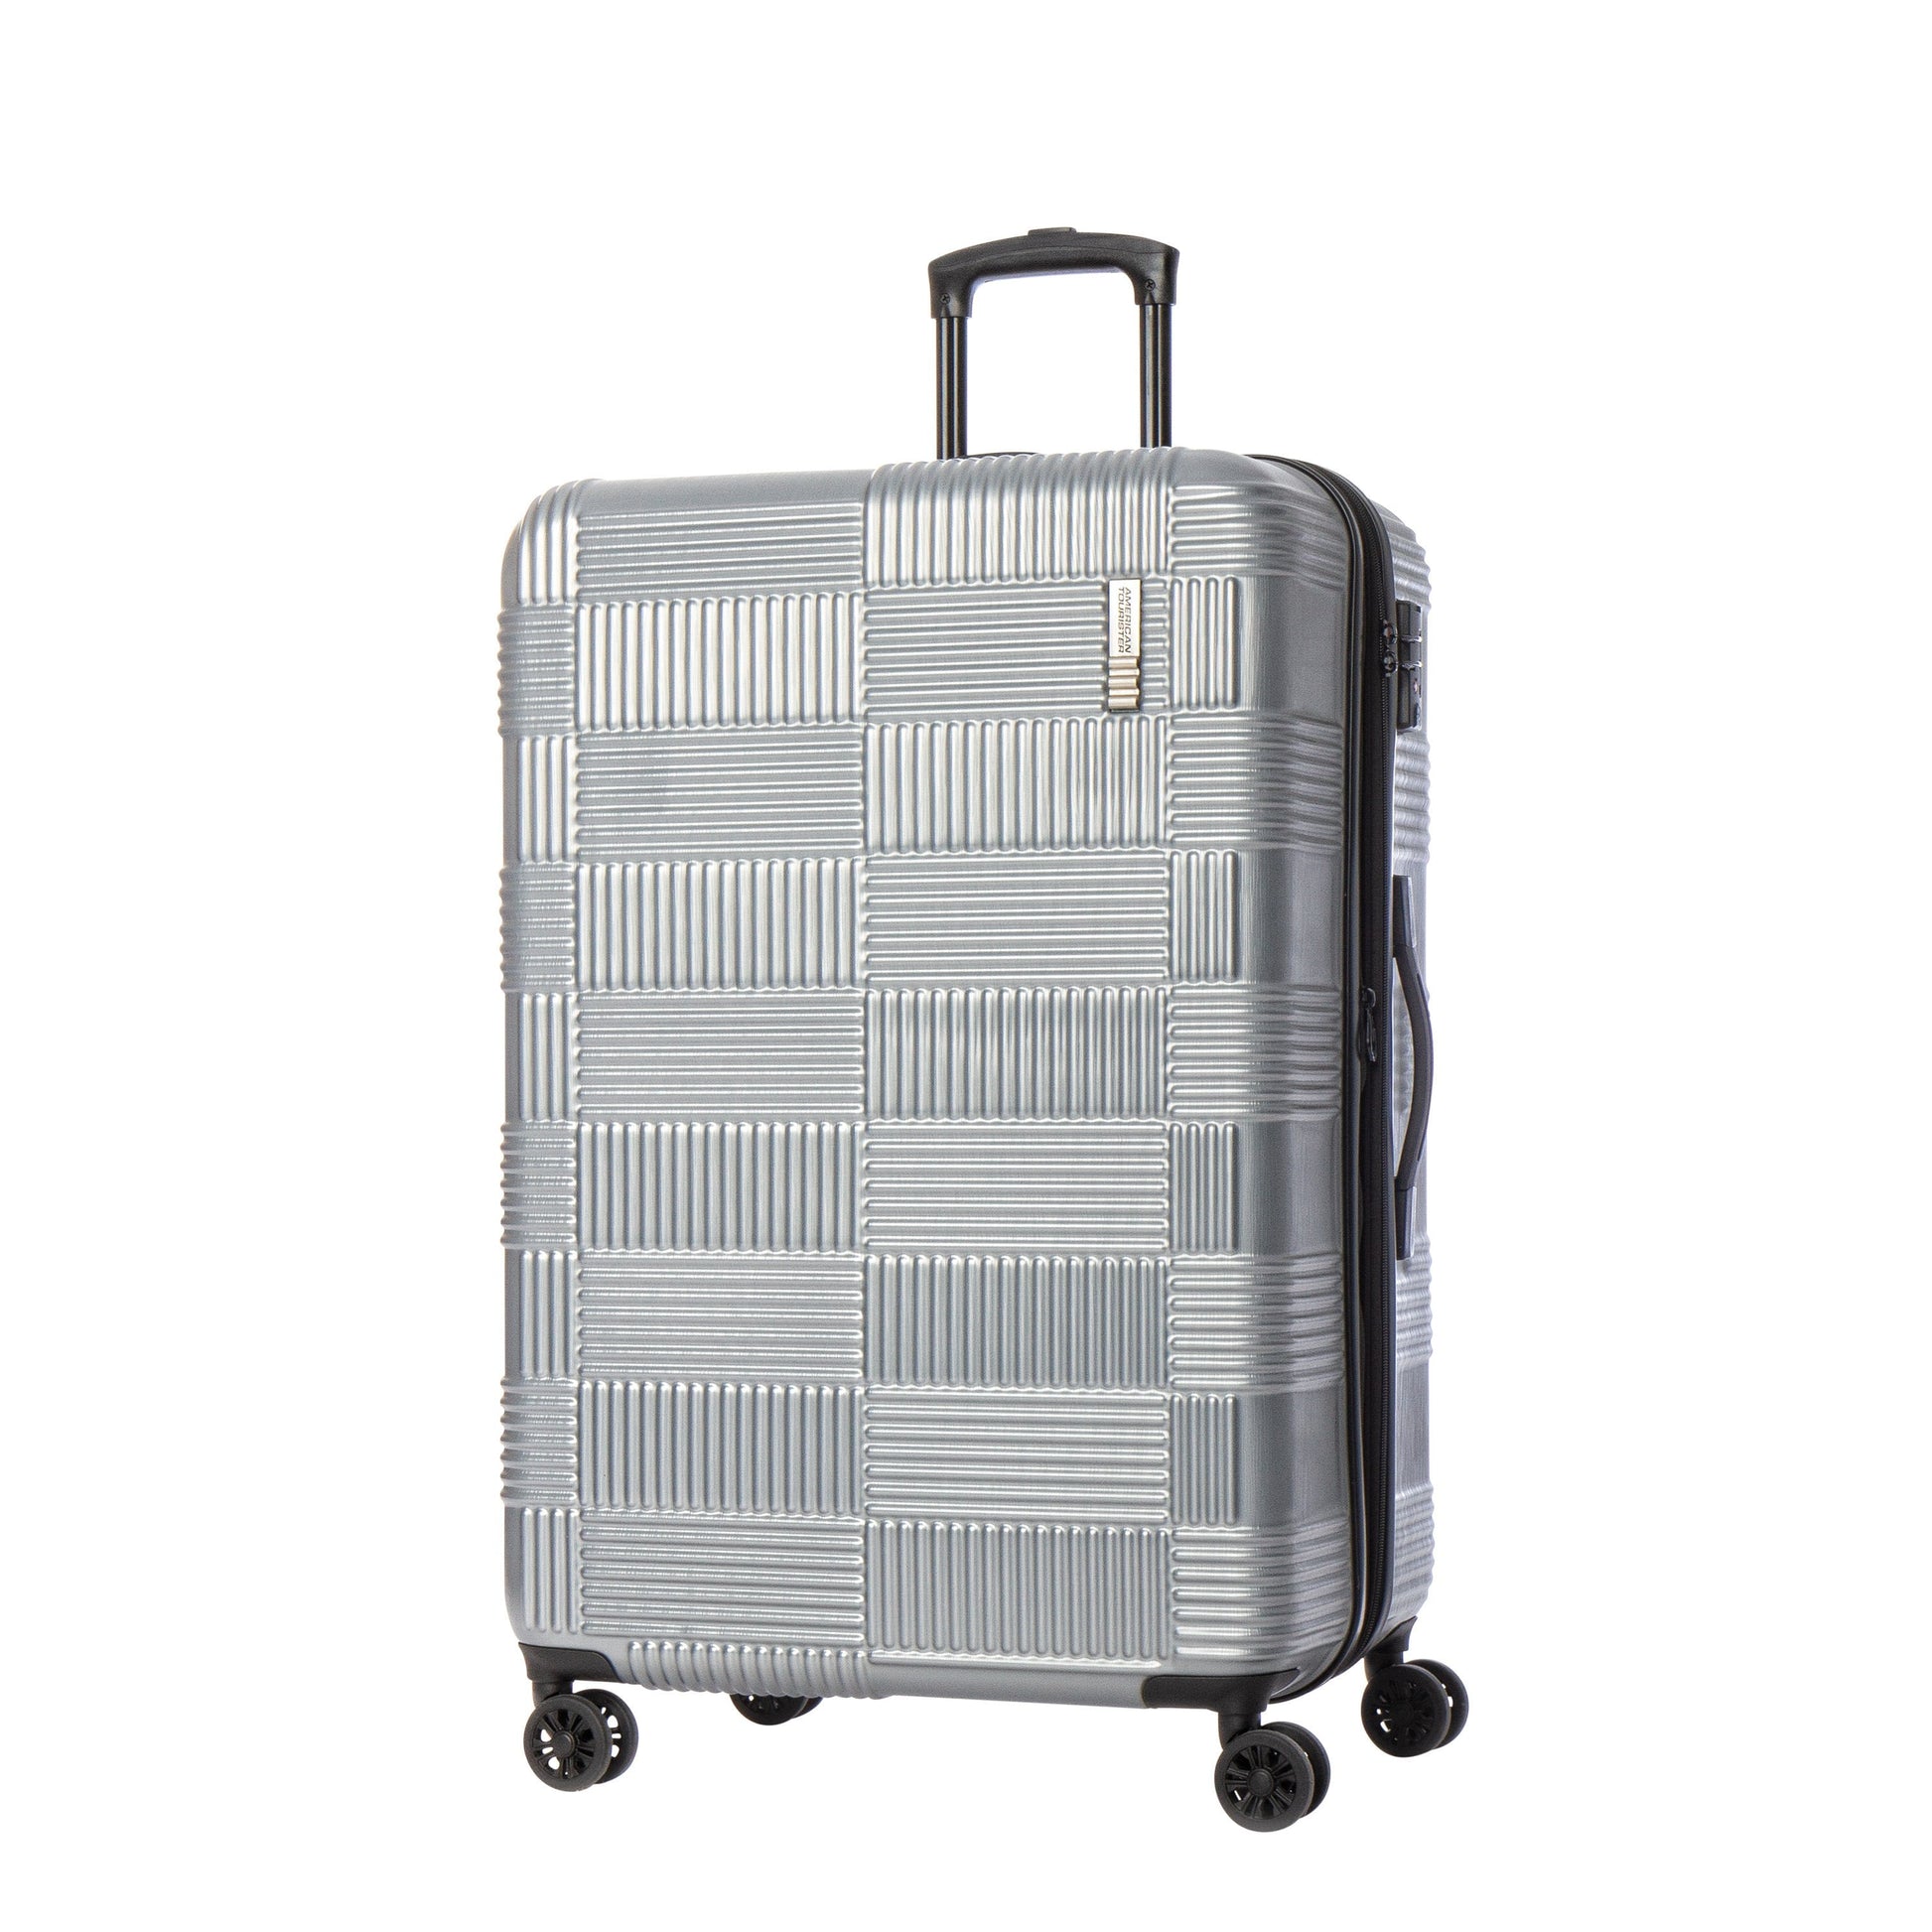 American Tourister Unify Spinner Large Expandable Luggage - Silver